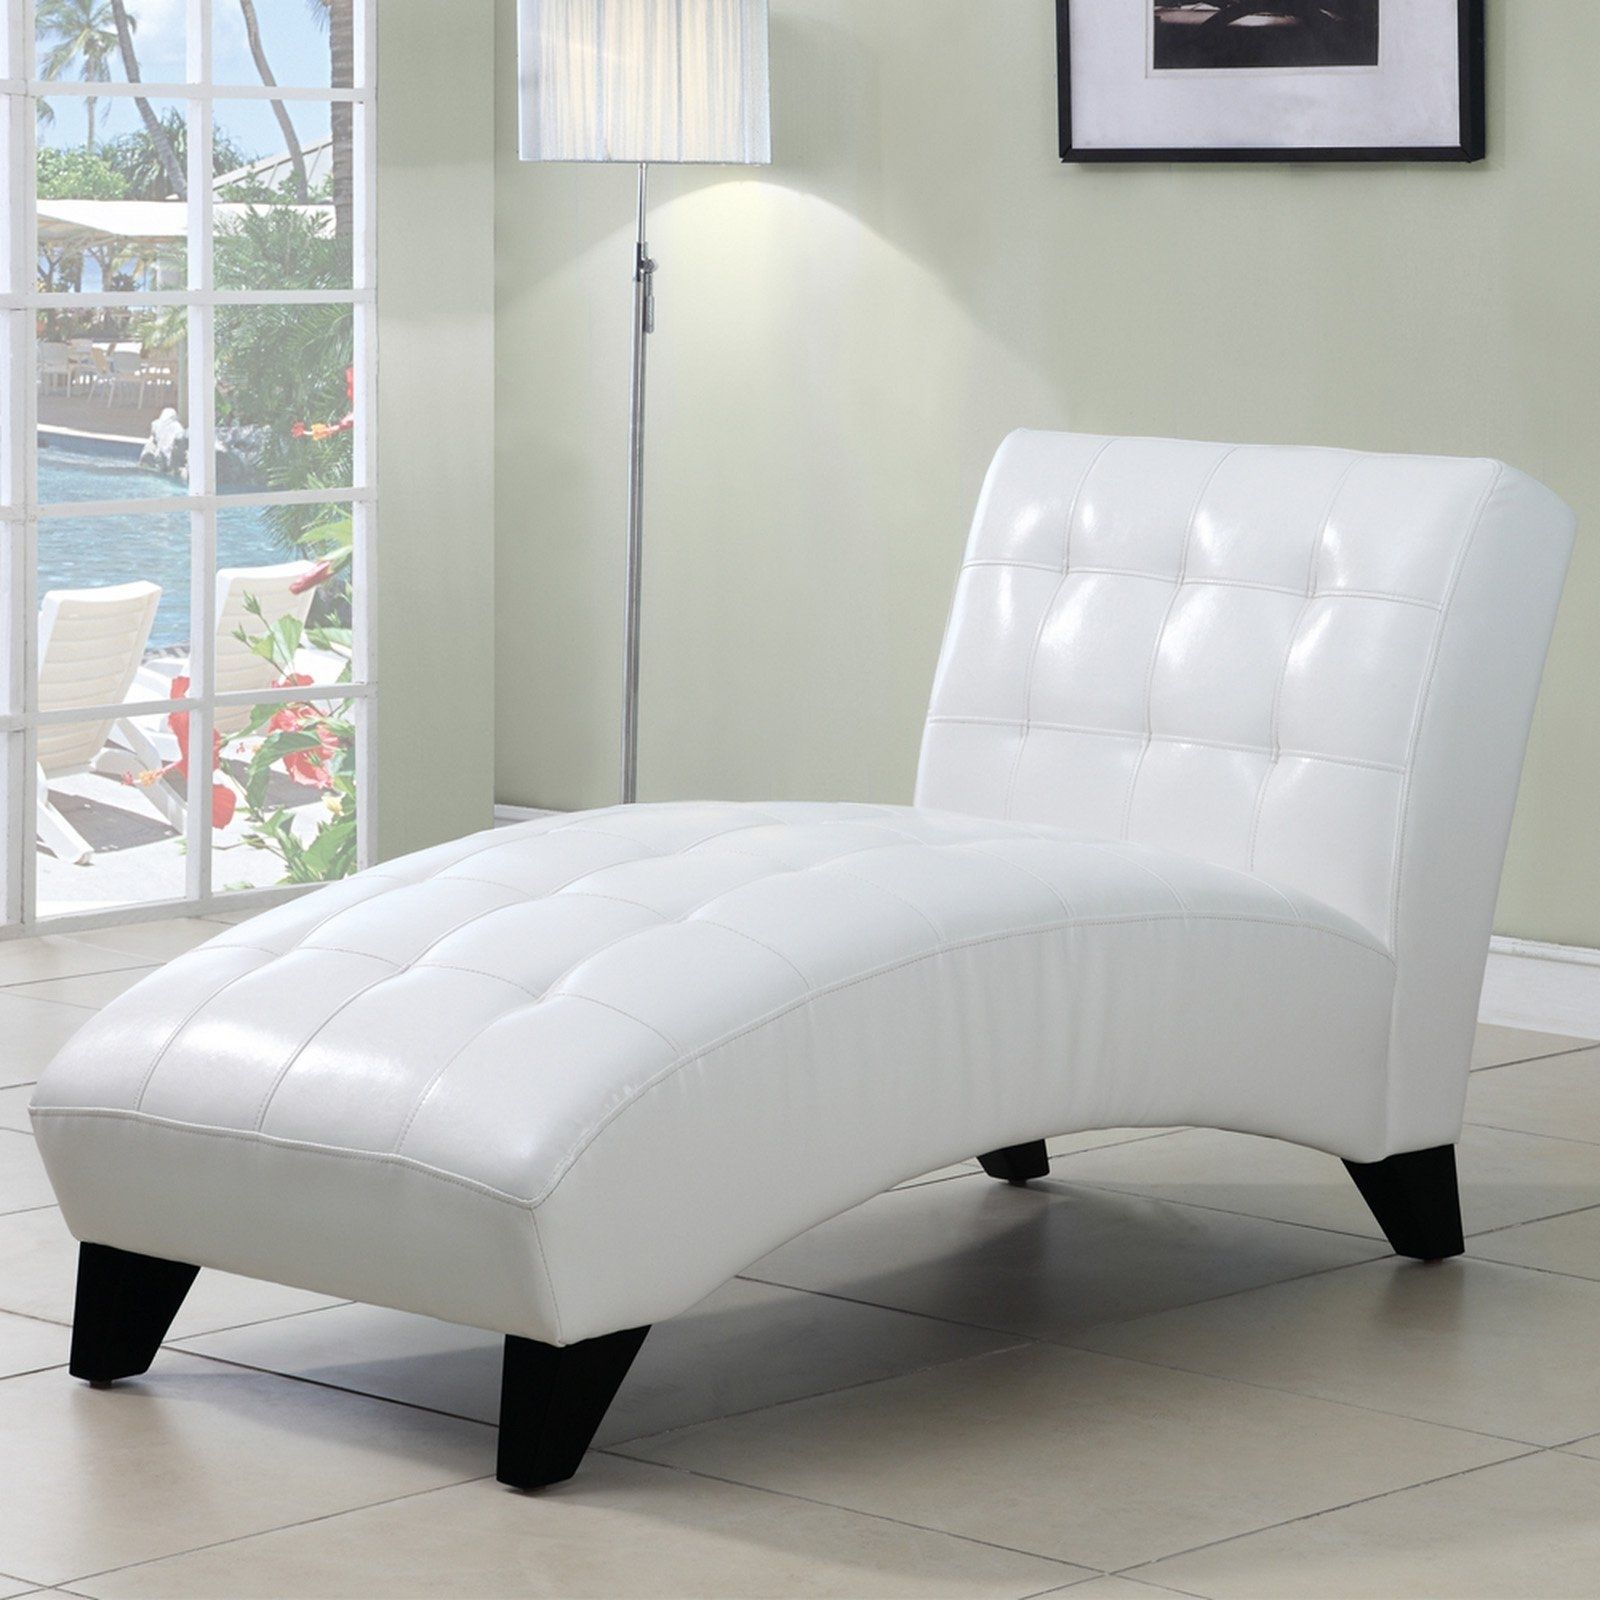 Top 15 of White Leather Chaise Lounges